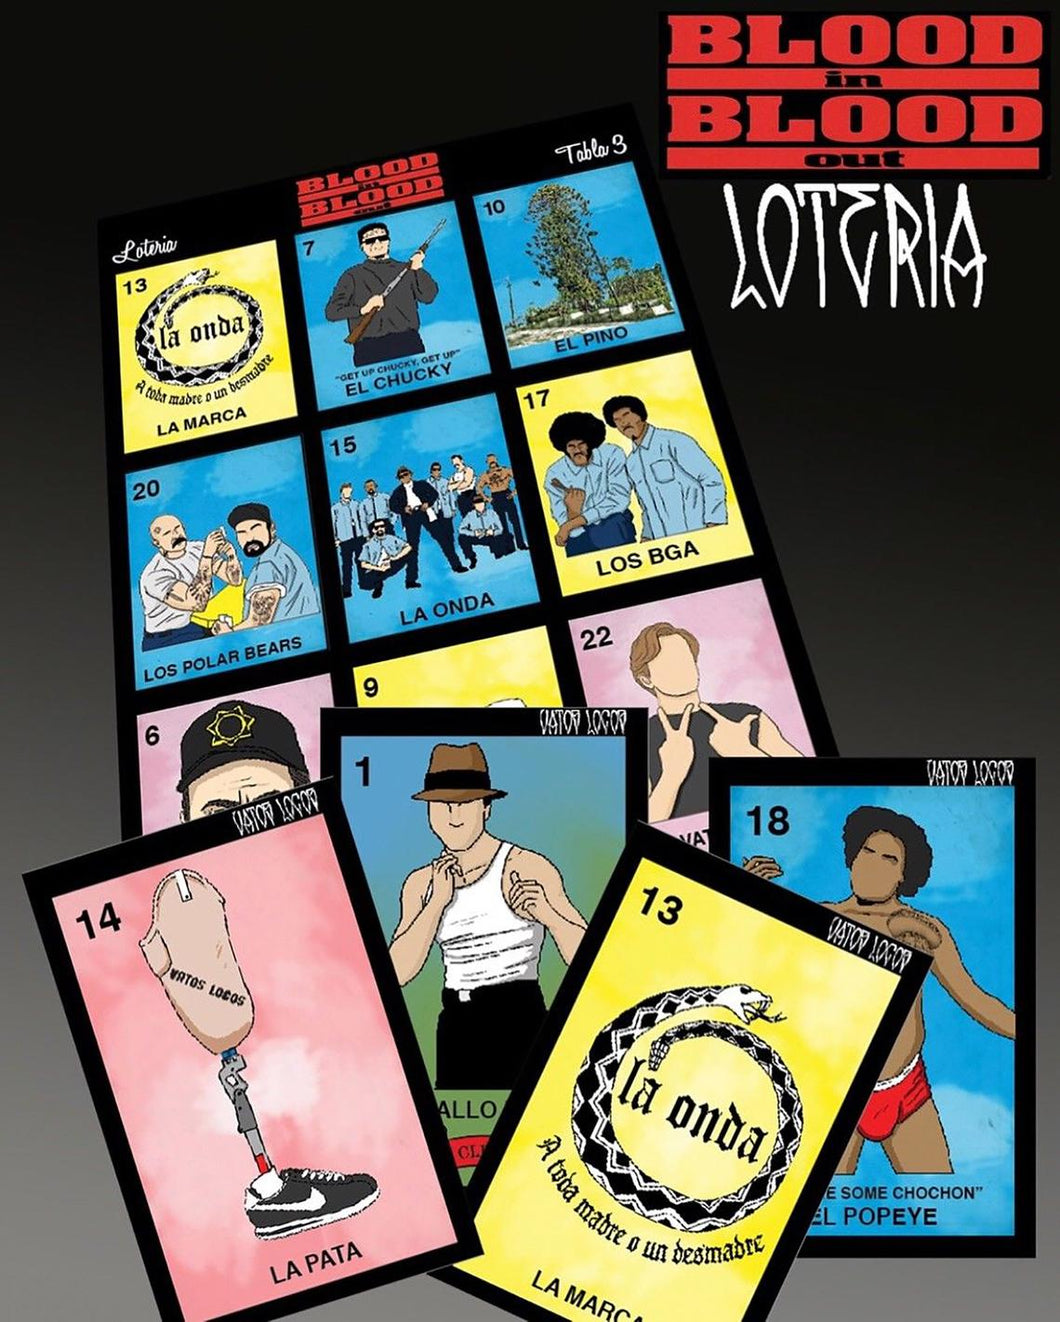 Blood In Blood Out Loteria by Ruthlezz Society